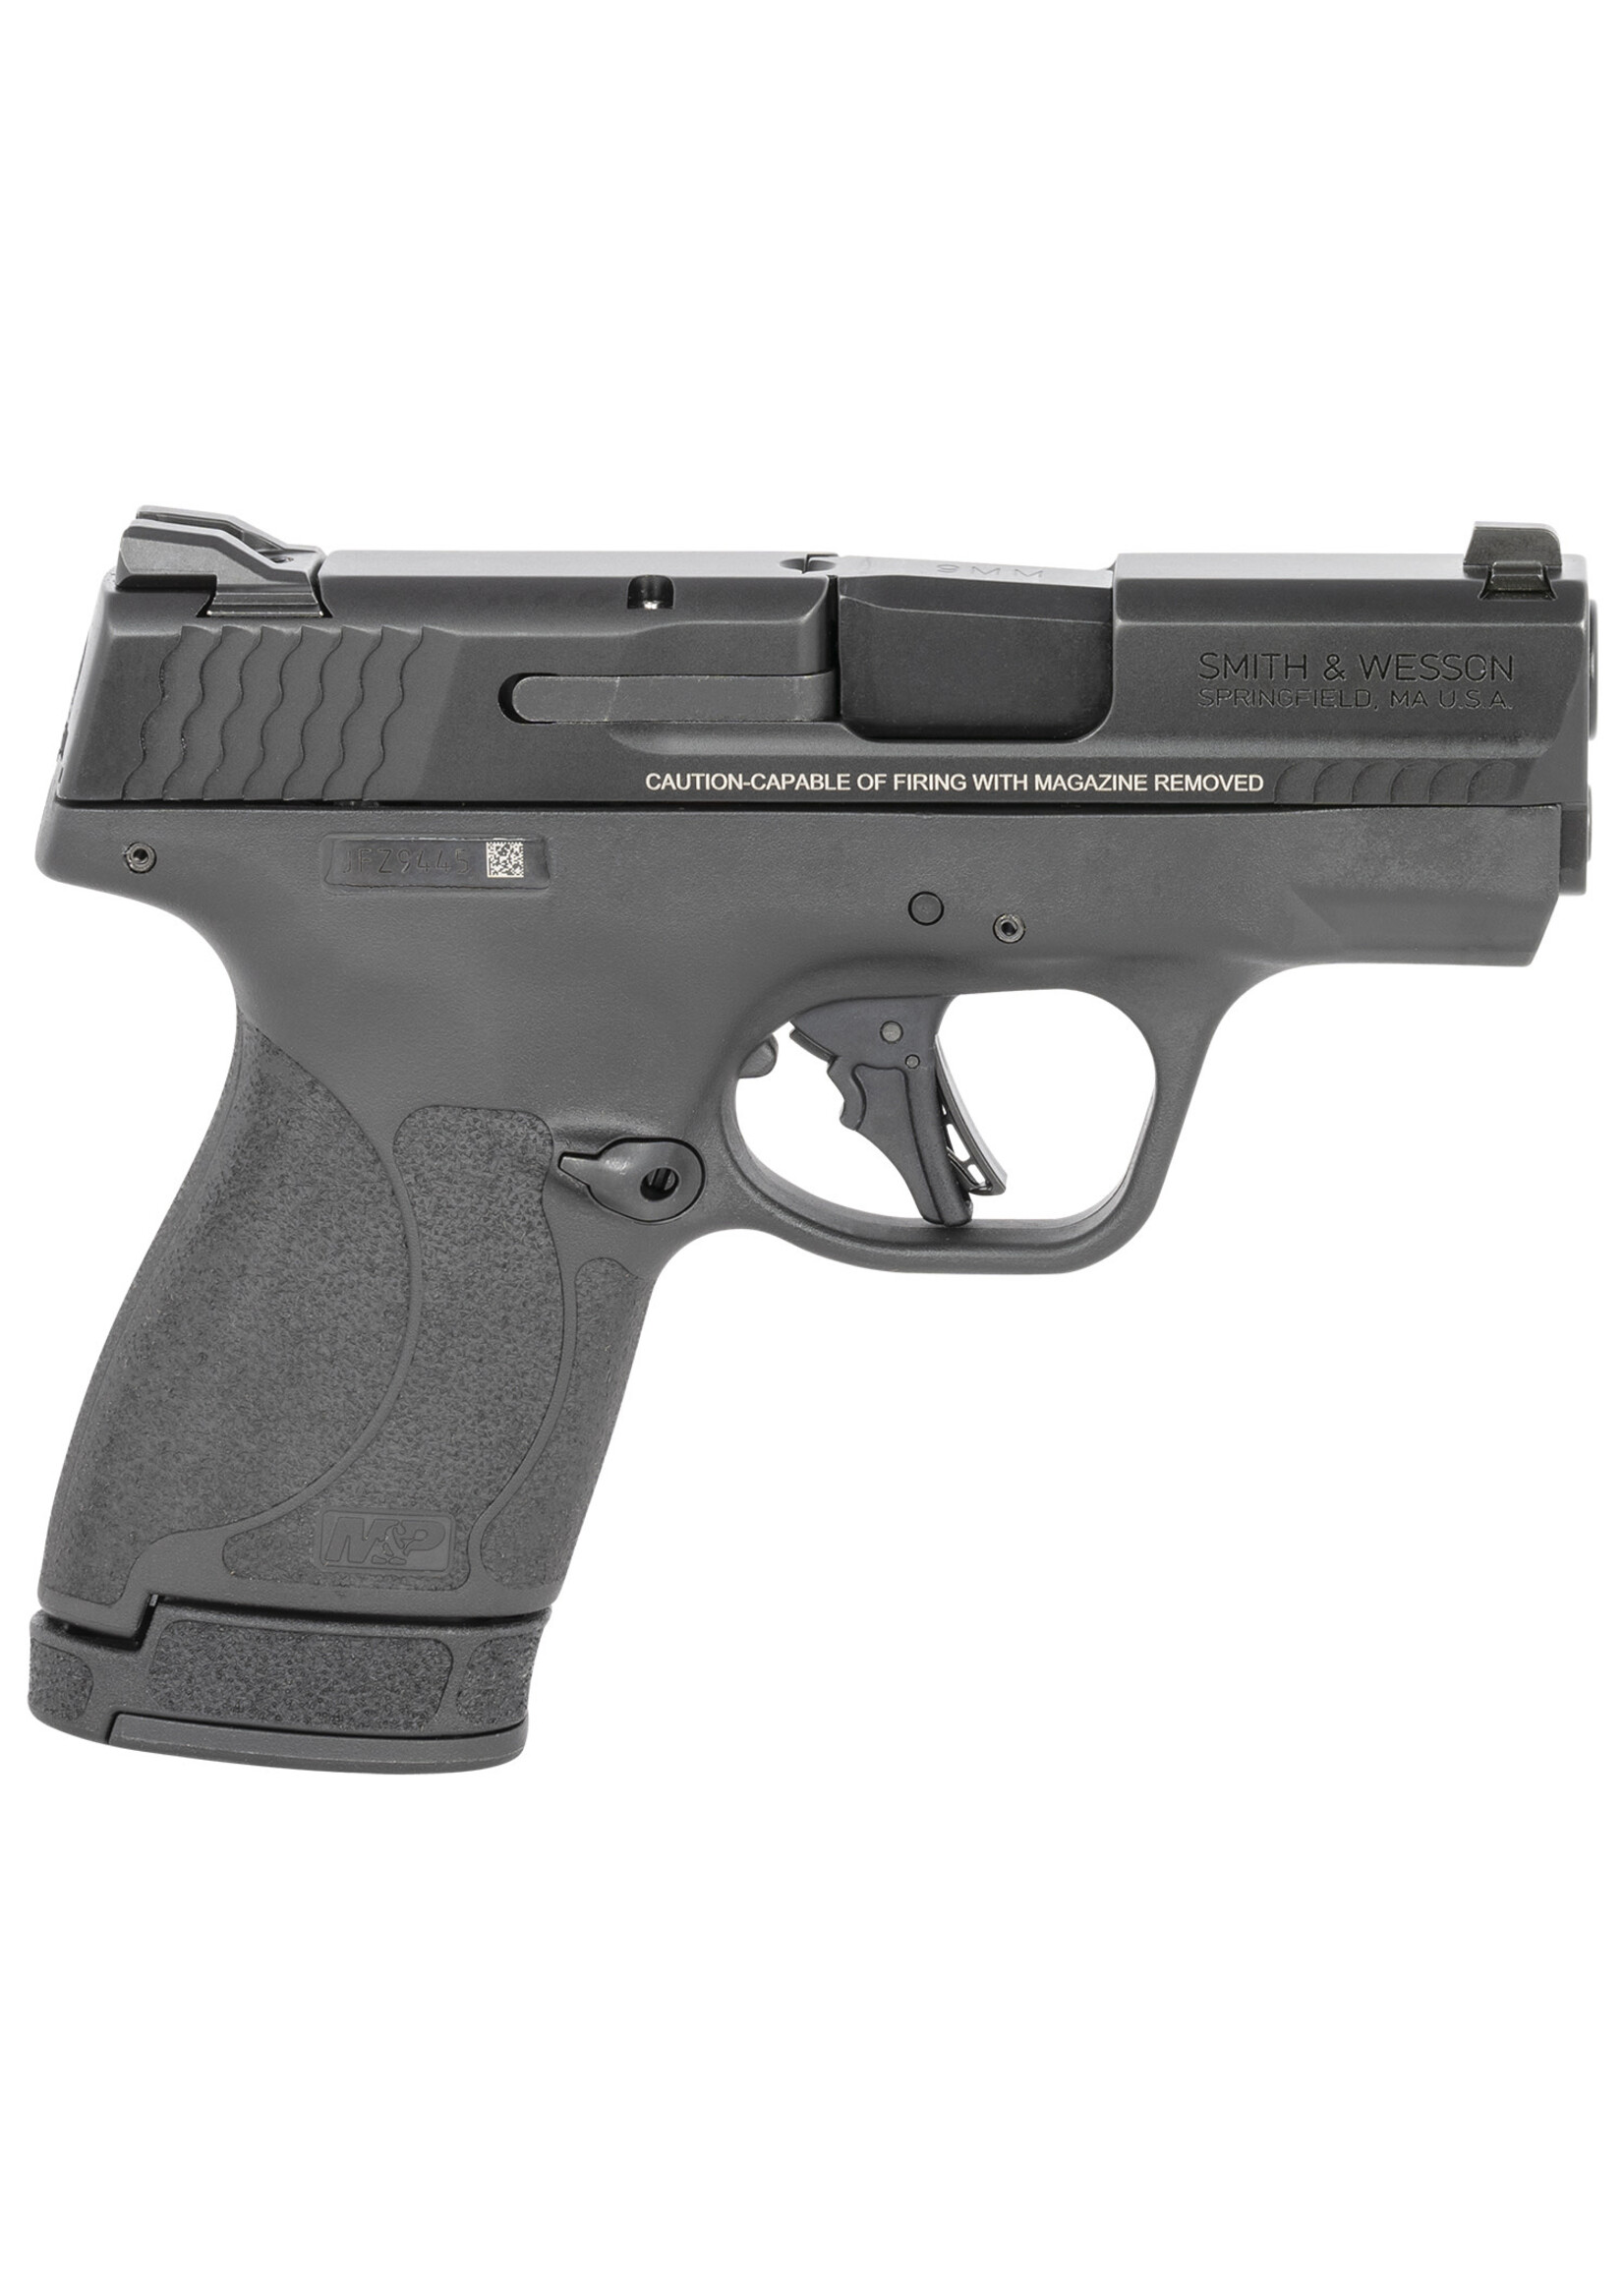 Smith and Wesson (S&W) Smith & Wesson M&P Shield Plus, 9mm, 3.10" 10+1, 13+1, Matte Black Armornite Stainless Steel Slide, manual safety